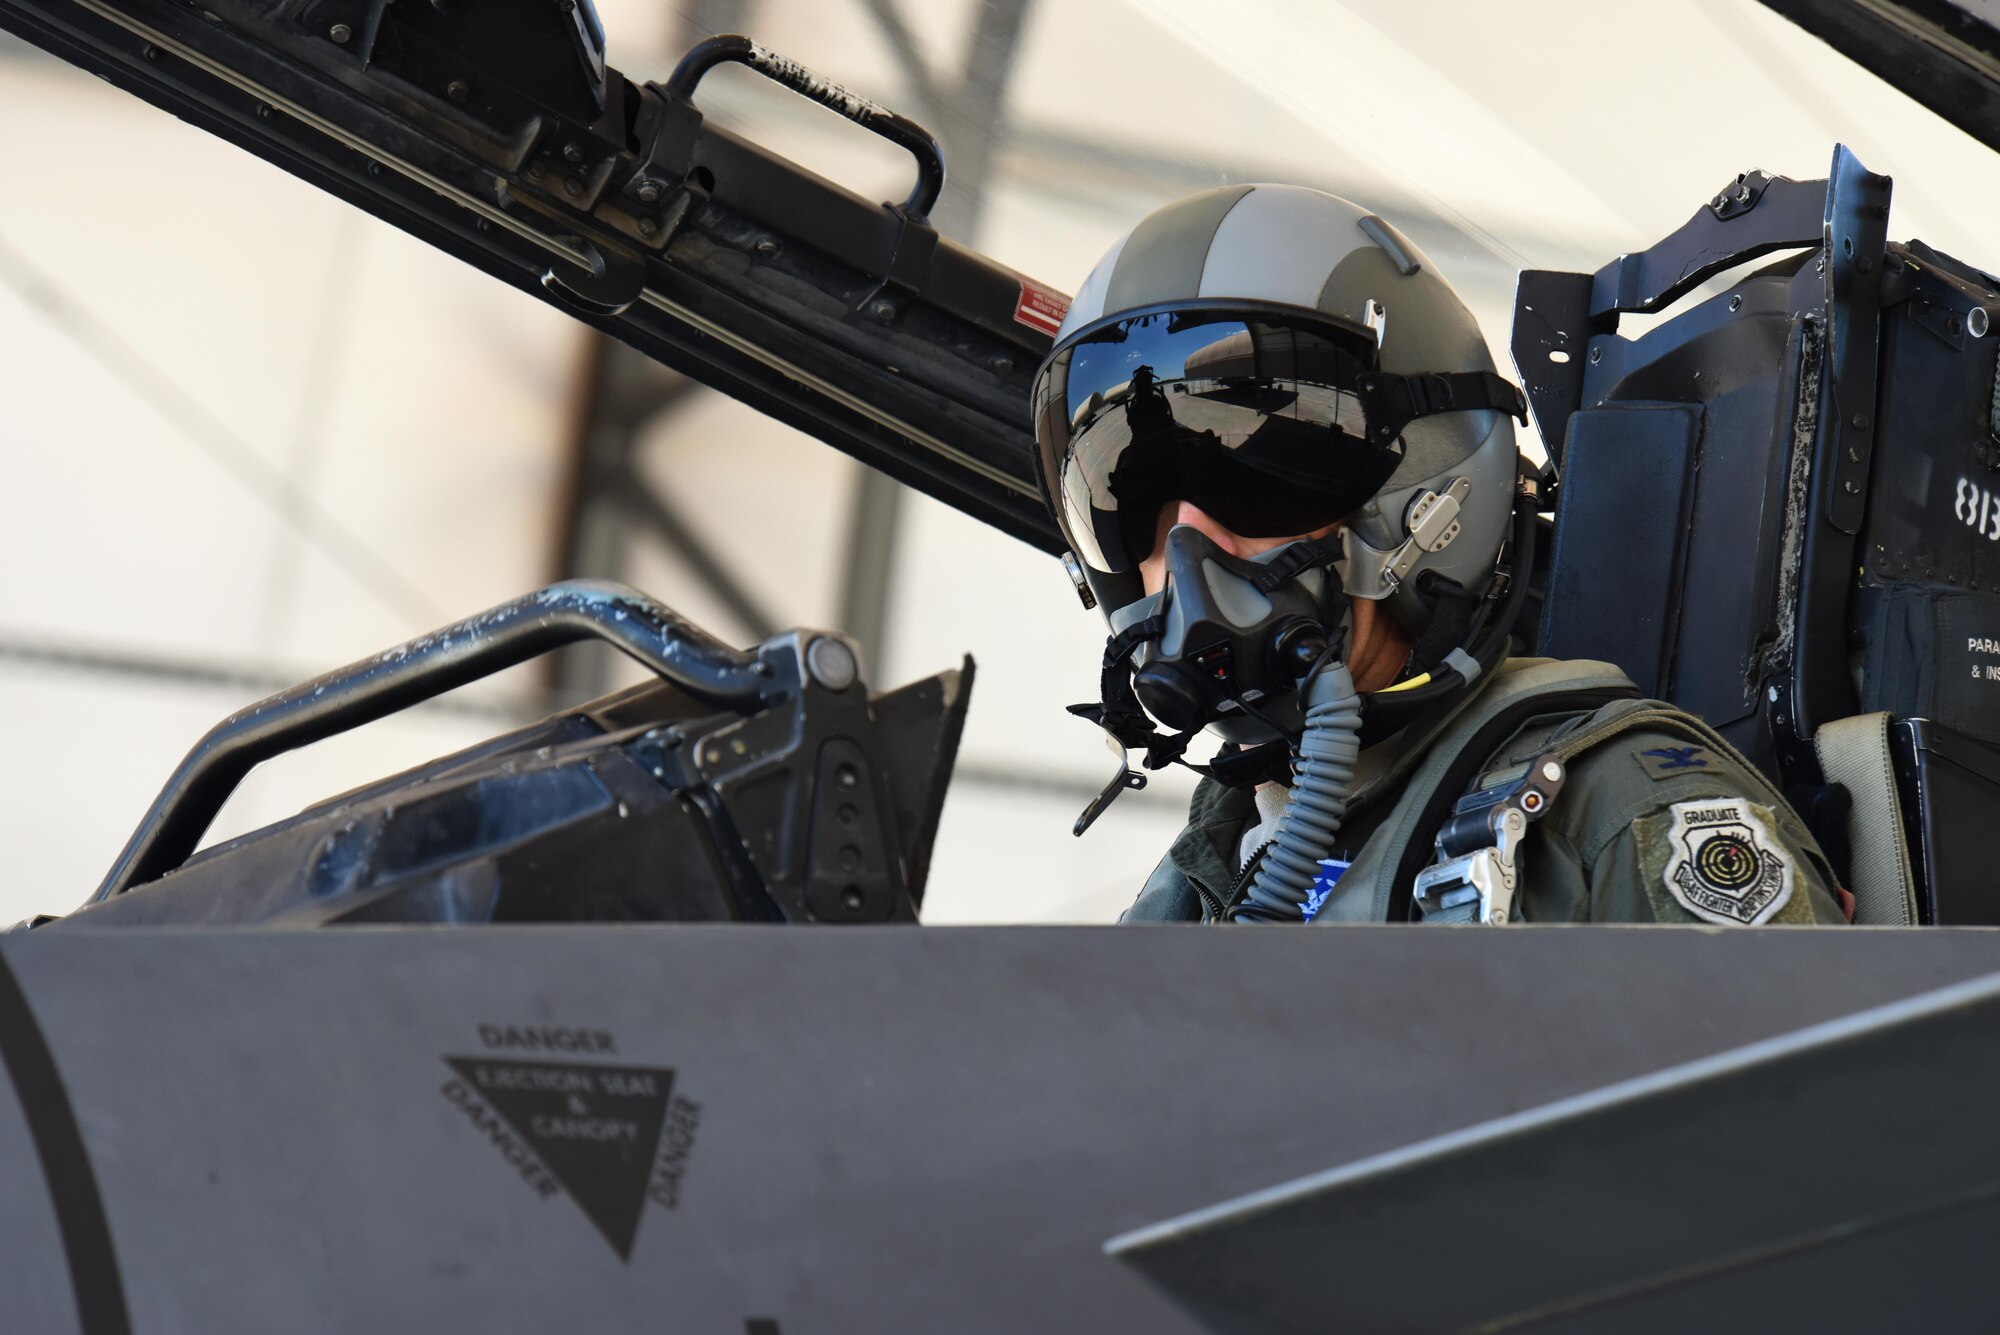 Col. Brian Afflerbaugh, 4th Operations Group commander, makes final preparations before his final F-15E Strike Eagle flight, June 8, 2016, at Seymour Johnson Air Force Base, North Carolina. Afllerbaugh leaves the 4th Fighter Wing for an assignment at Osan Air Base, Republic of Korea. (U.S. Air Force photo/Tech. Sgt. Chuck Broadway)